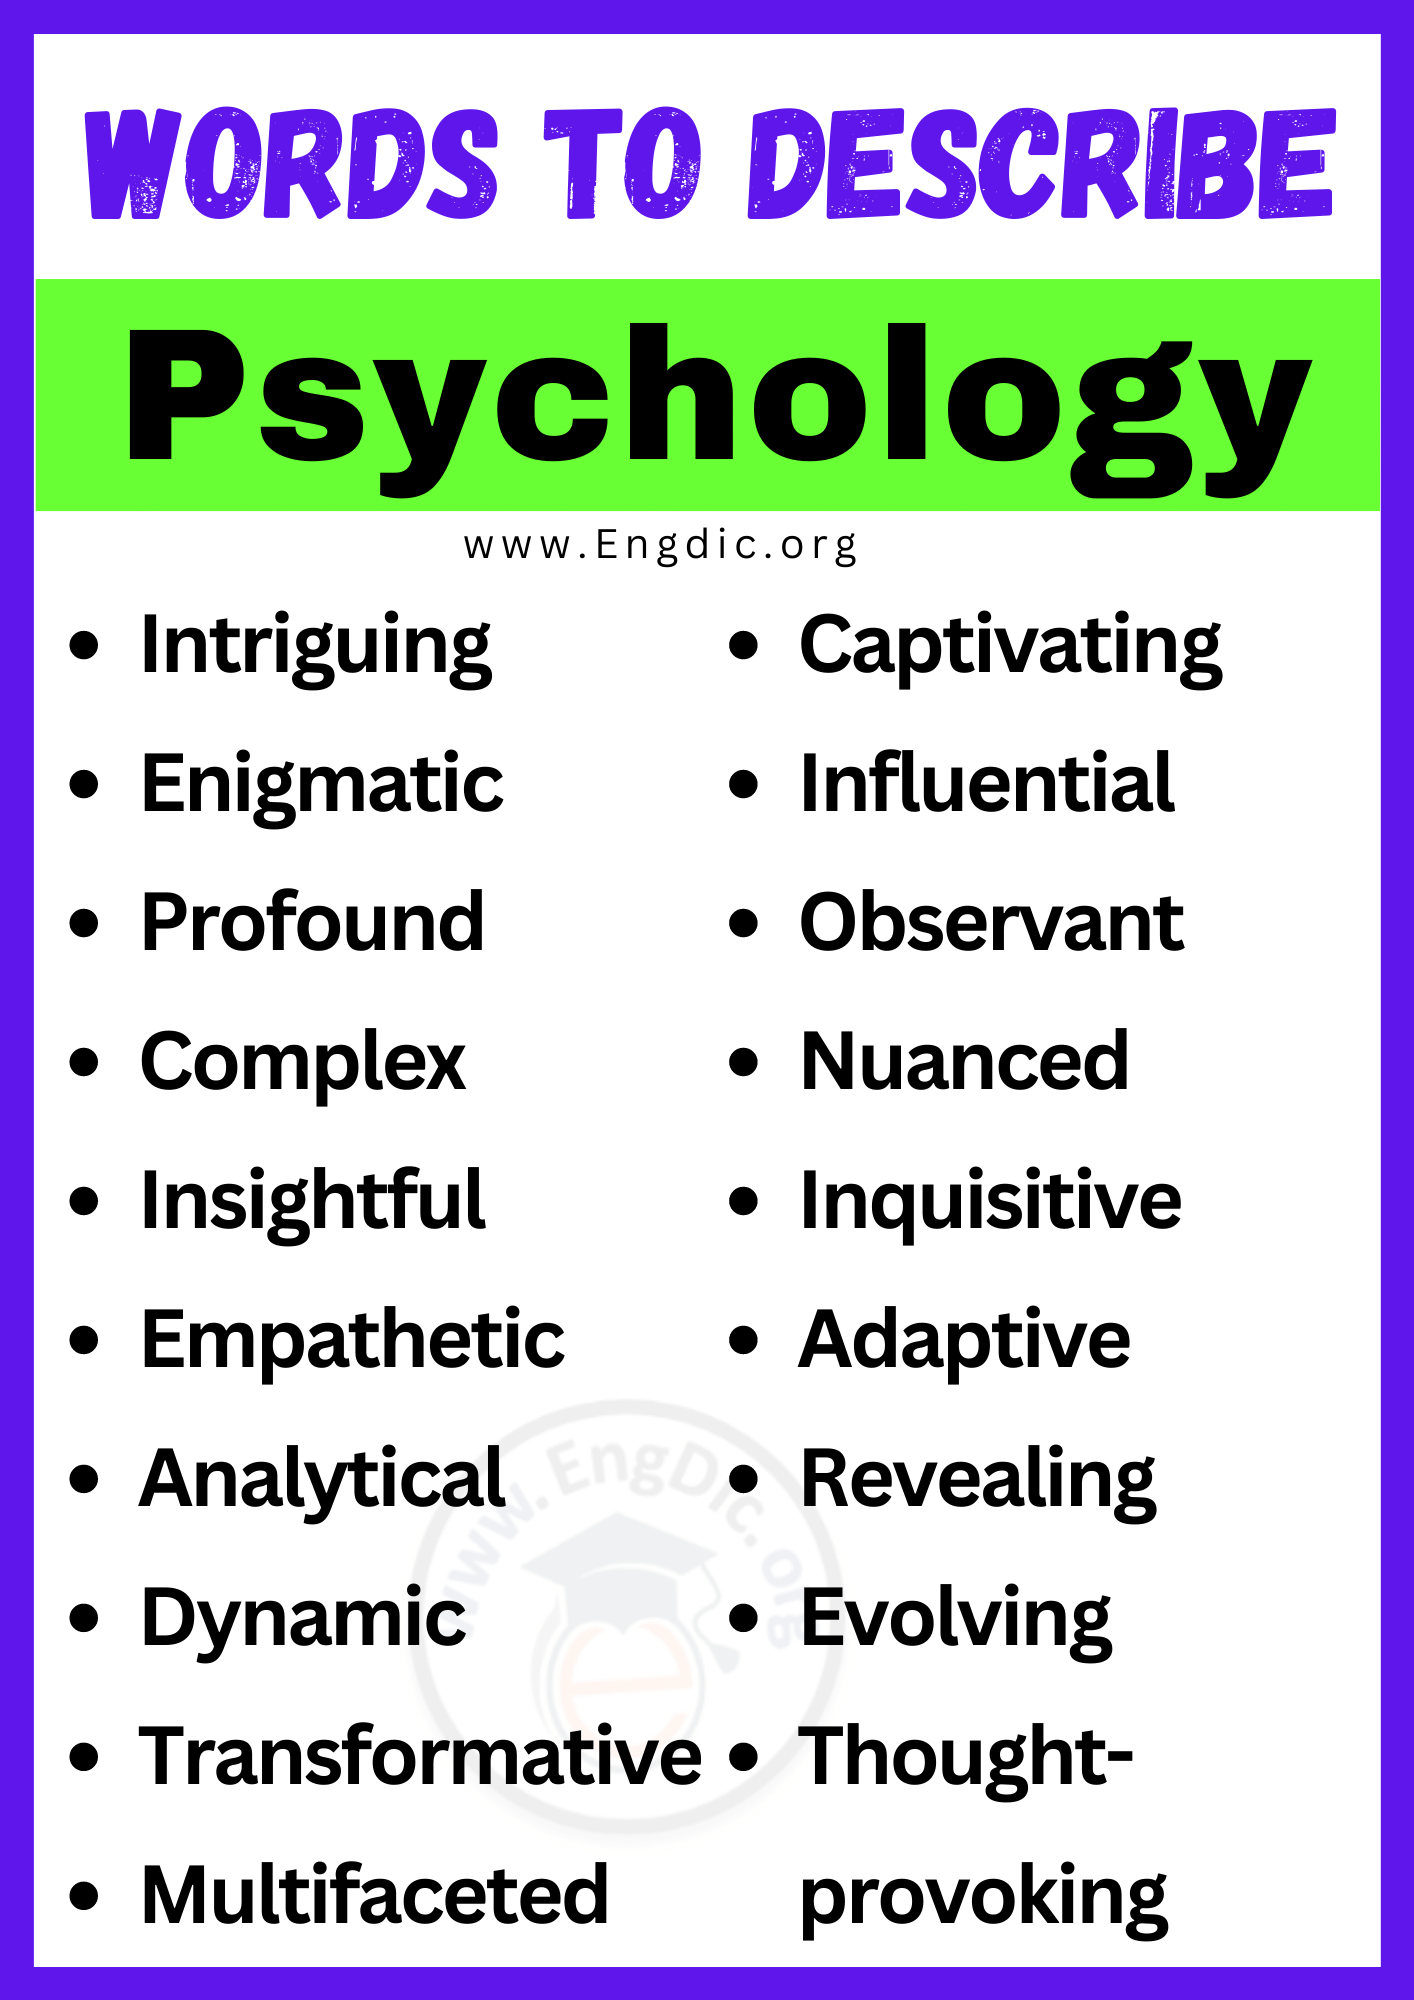 Words to Describe Psychology